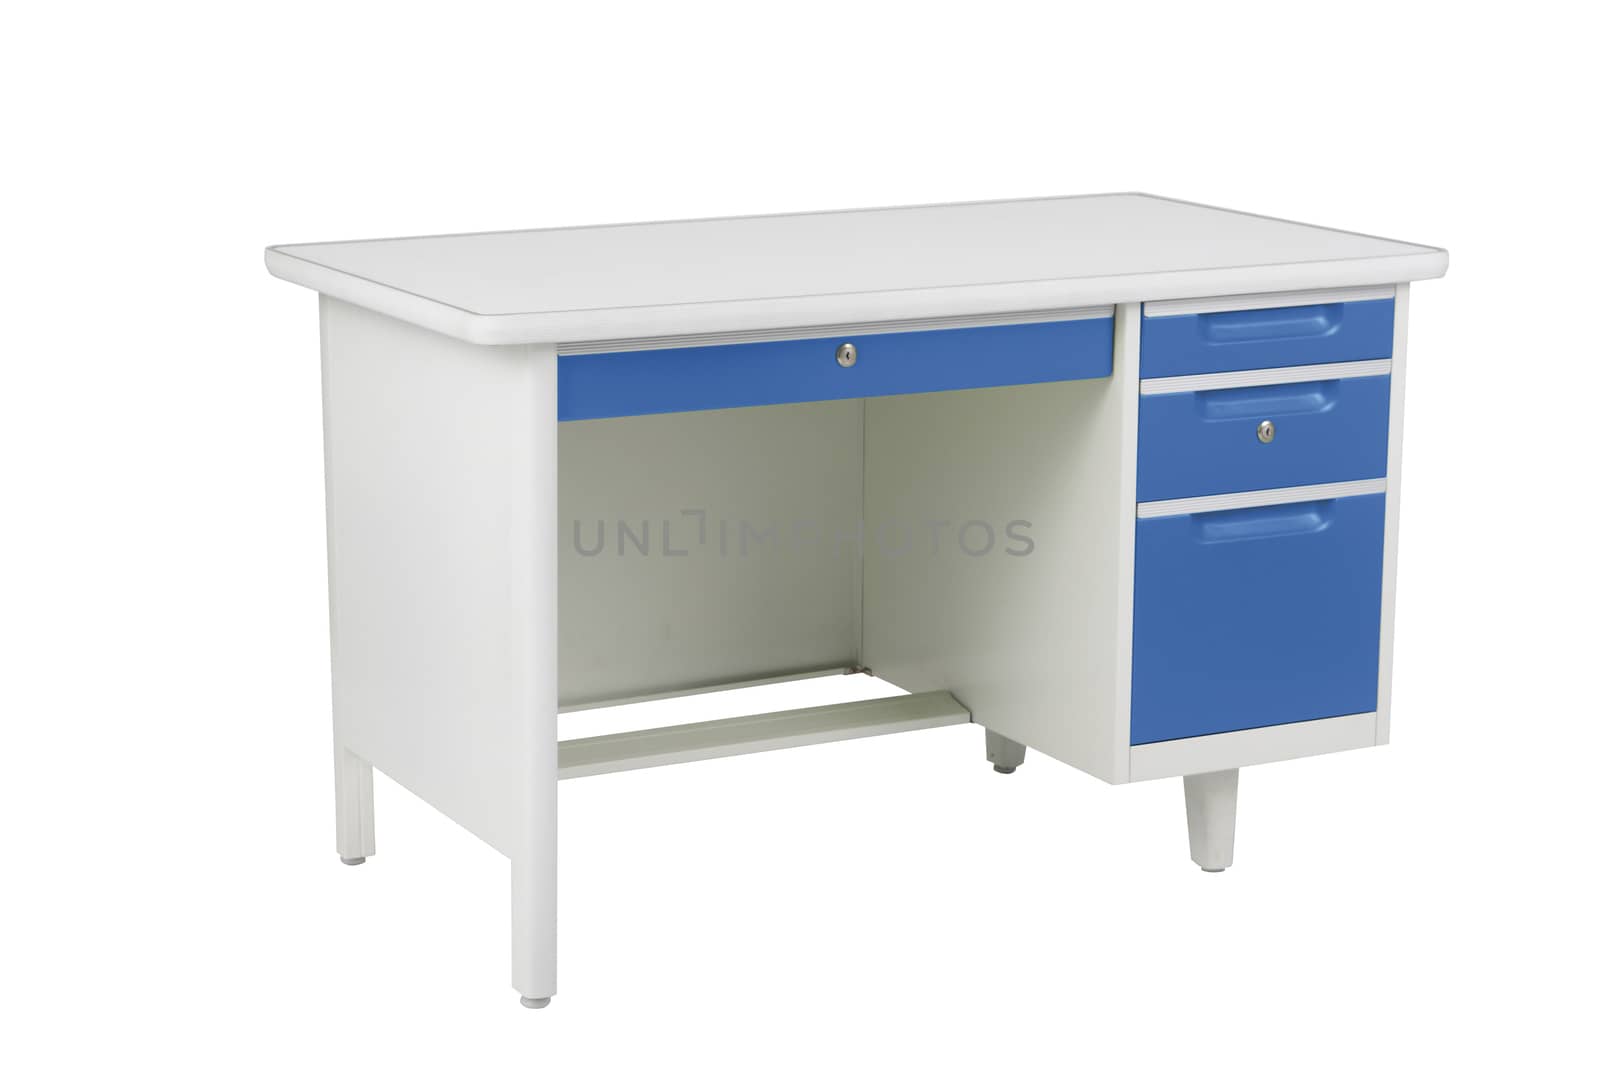 Blue and white steel office table with drawers furniture isolated on white background. by sonandonures